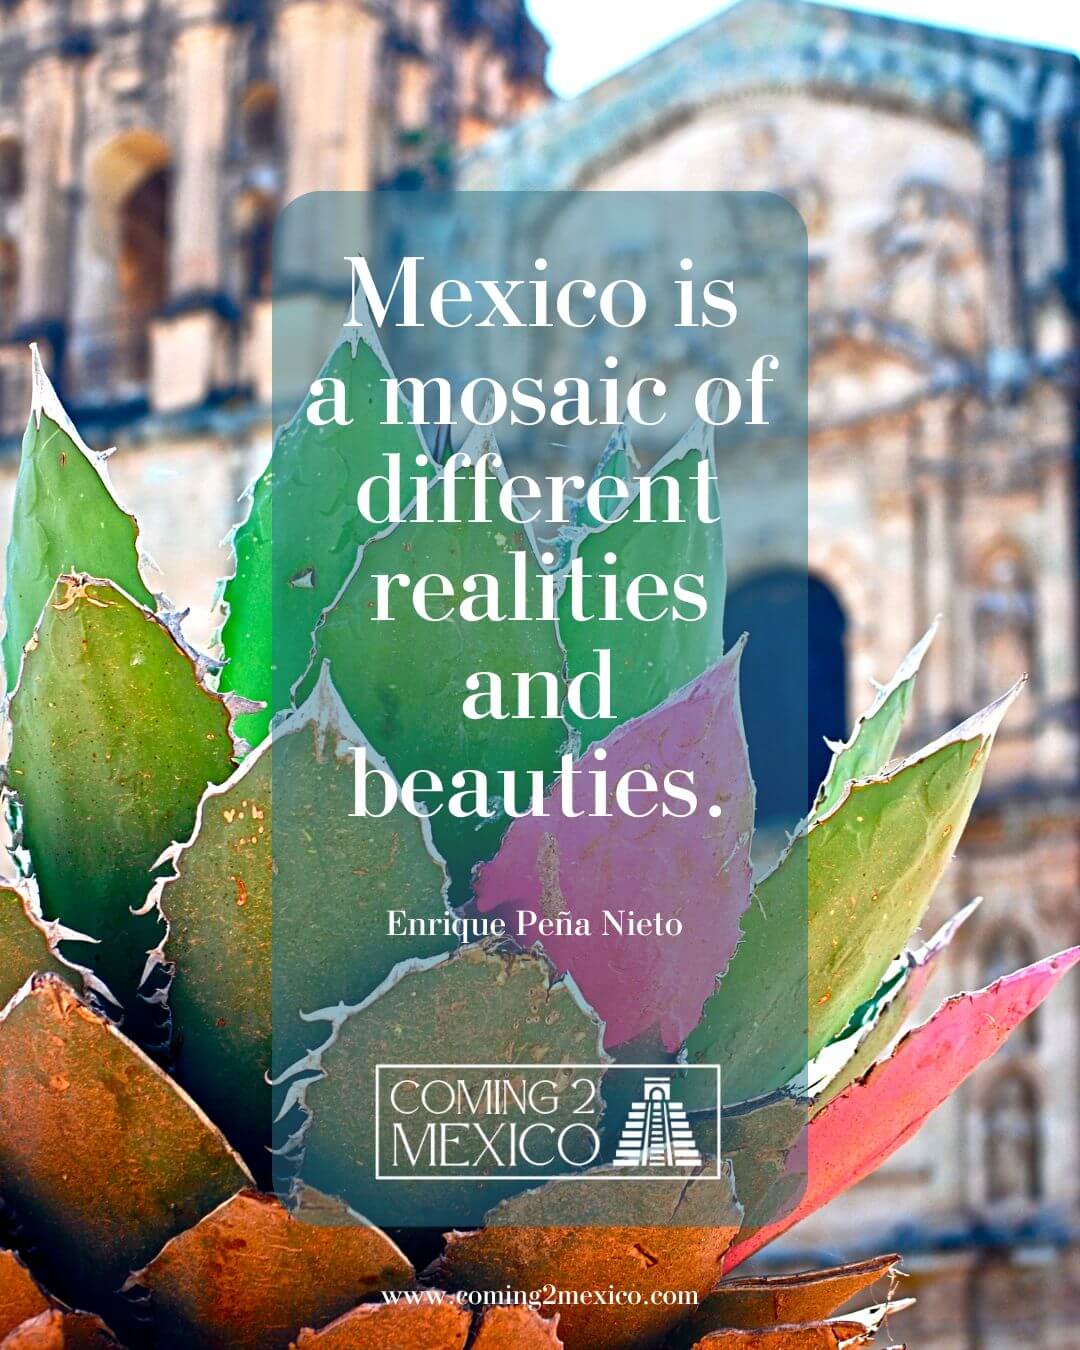 “Mexico is a mosaic of different realities and beauties.” – Enrique Peña Nieto